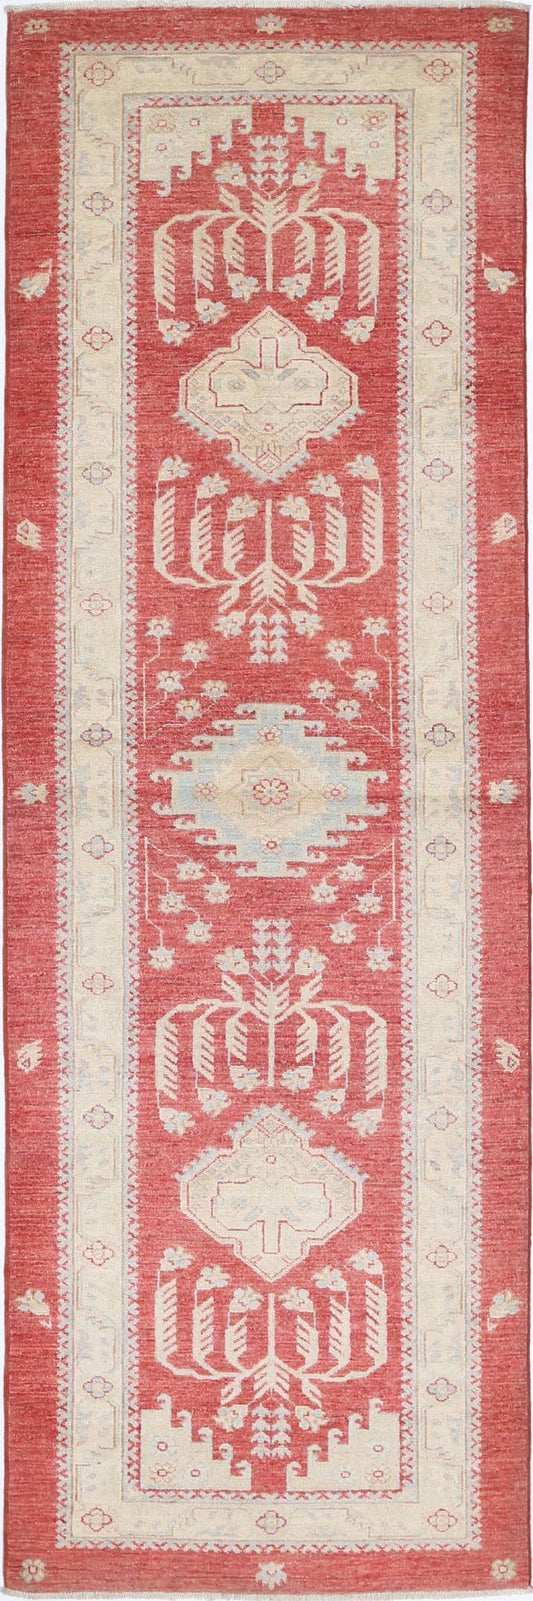 Traditional Hand Knotted Ziegler Farhan Wool Rug of Size 2'7'' X 8'2'' in Red and Red Colors - Made in Afghanistan